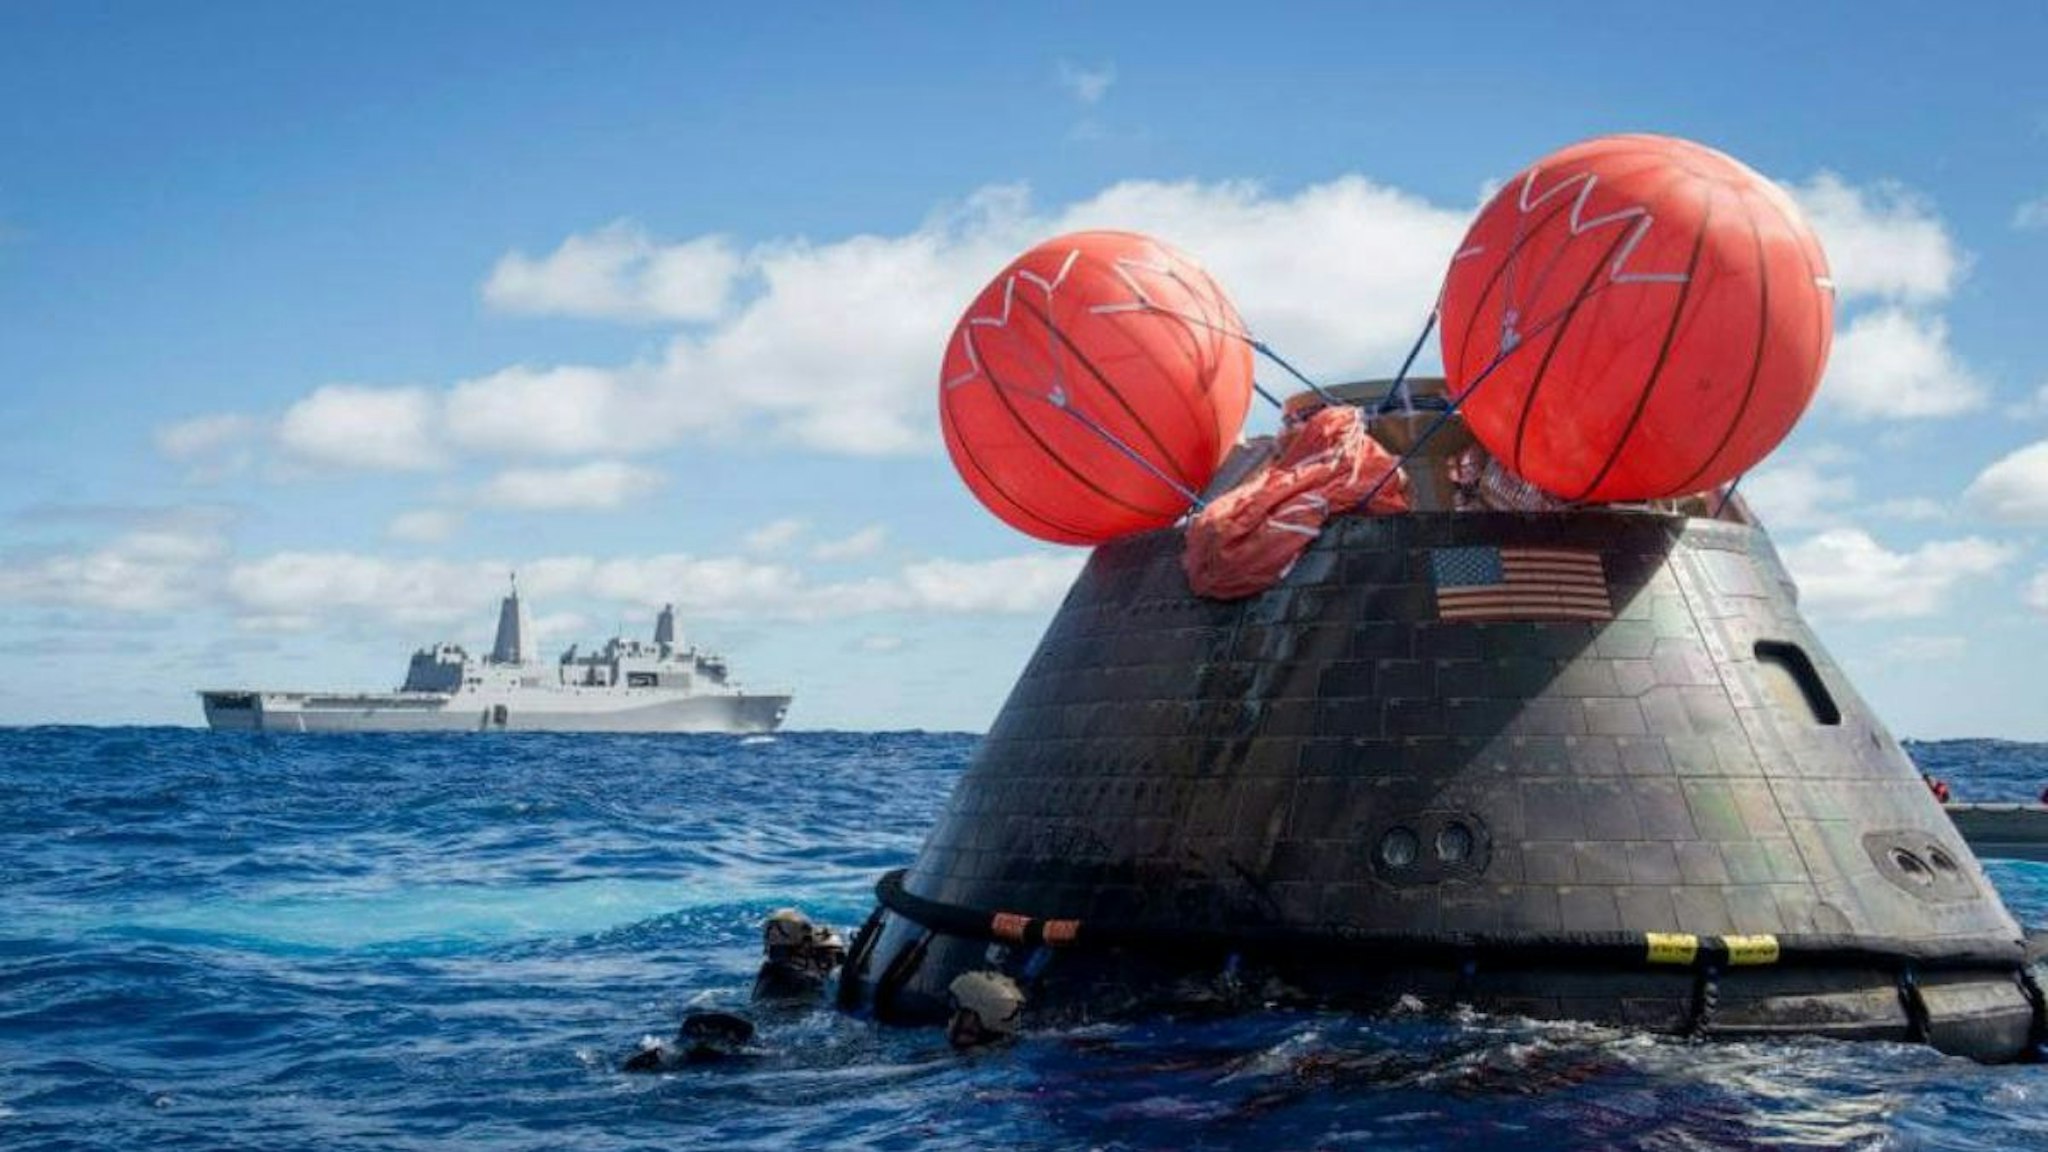 In this handout provided by U.S. Navy, Navy divers, assigned to Explosive Ordnance Disposal Mobile Unit 11 (EODMU11), Mobile Dive and Salvage Company 11-7, attach a towing bridal to the Orion Crew Module during the first Exploration Flight Test (EFT-1) NASA Orion Program following its launch from Cape Canaveral Air Force Station's Space Launch Complex 37 December 5, 2014 in the Pacific Ocean, 600 miles southwest of San Diego.